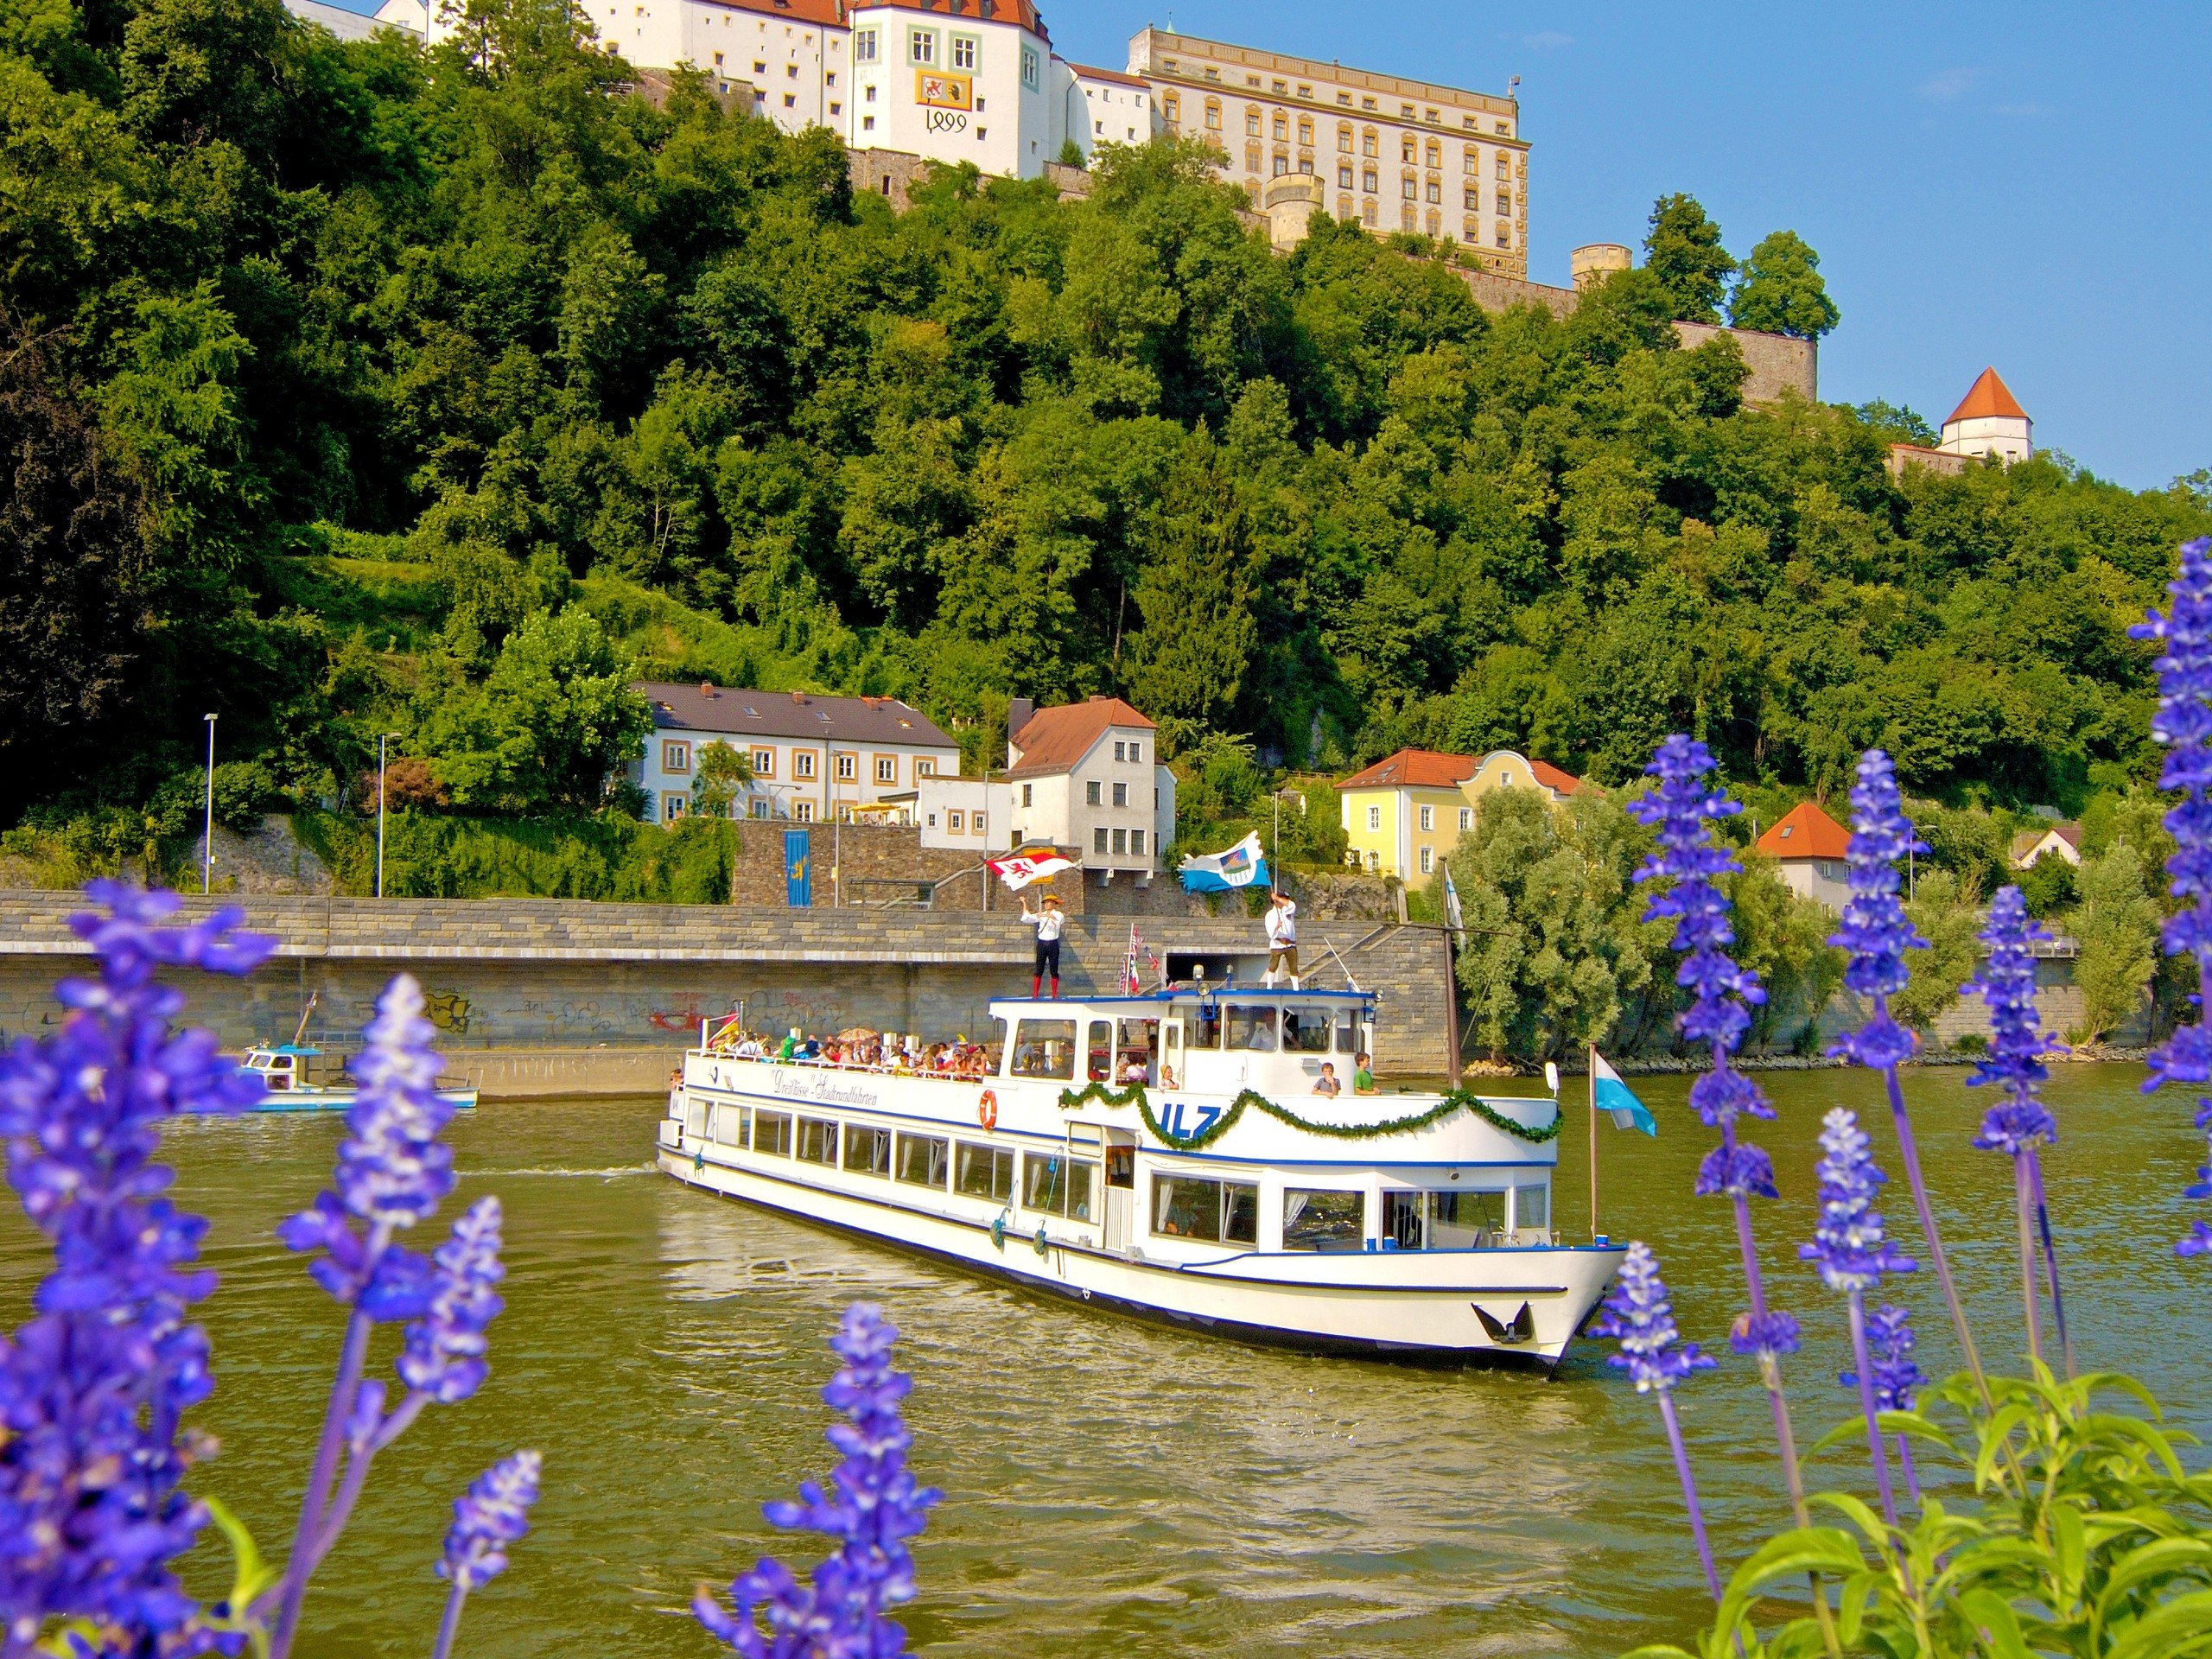 Small cruise ship seen on Danube river